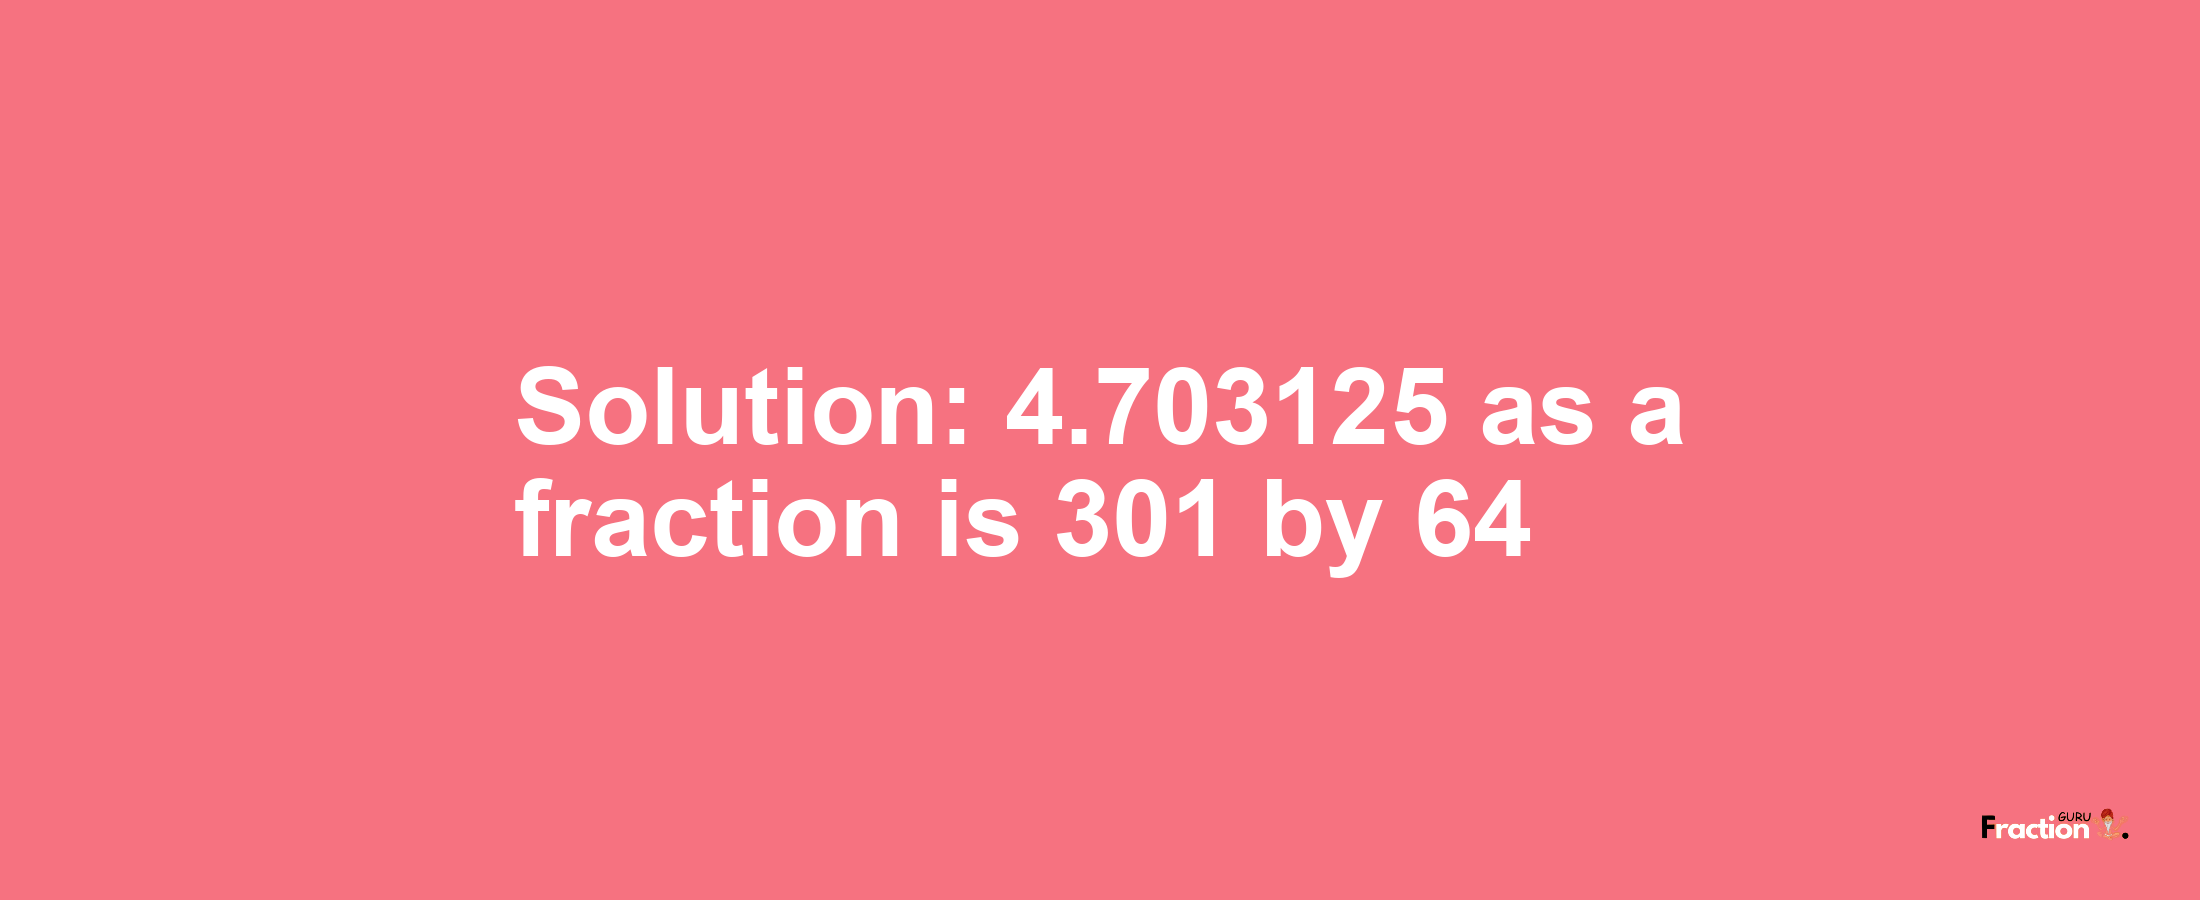 Solution:4.703125 as a fraction is 301/64